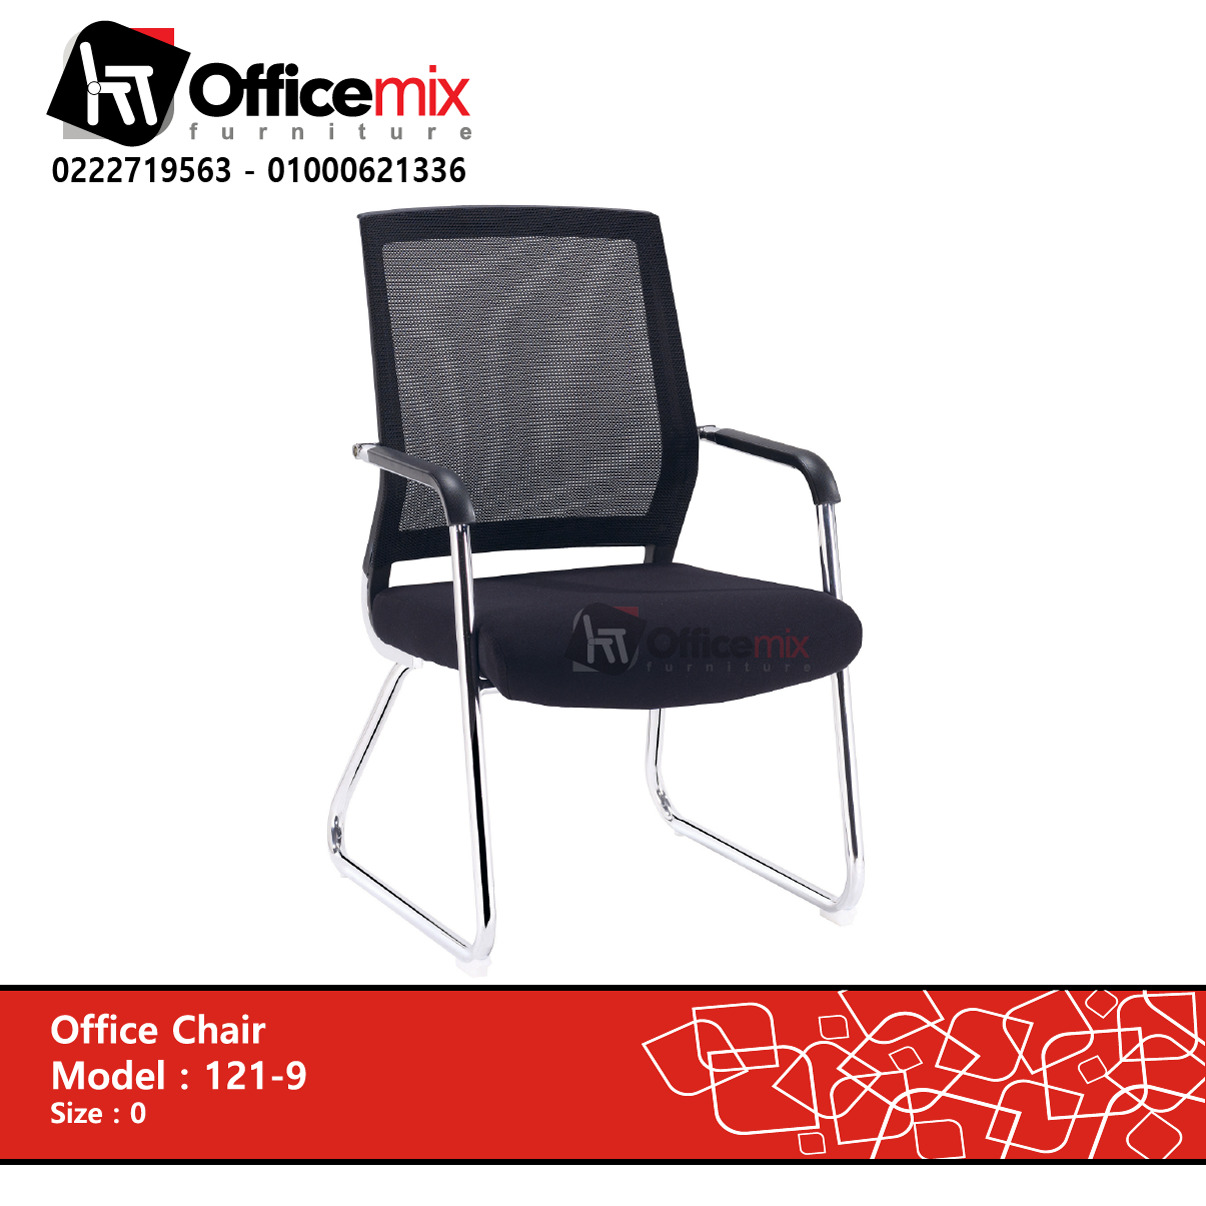 office mix Waiting chair 121-9